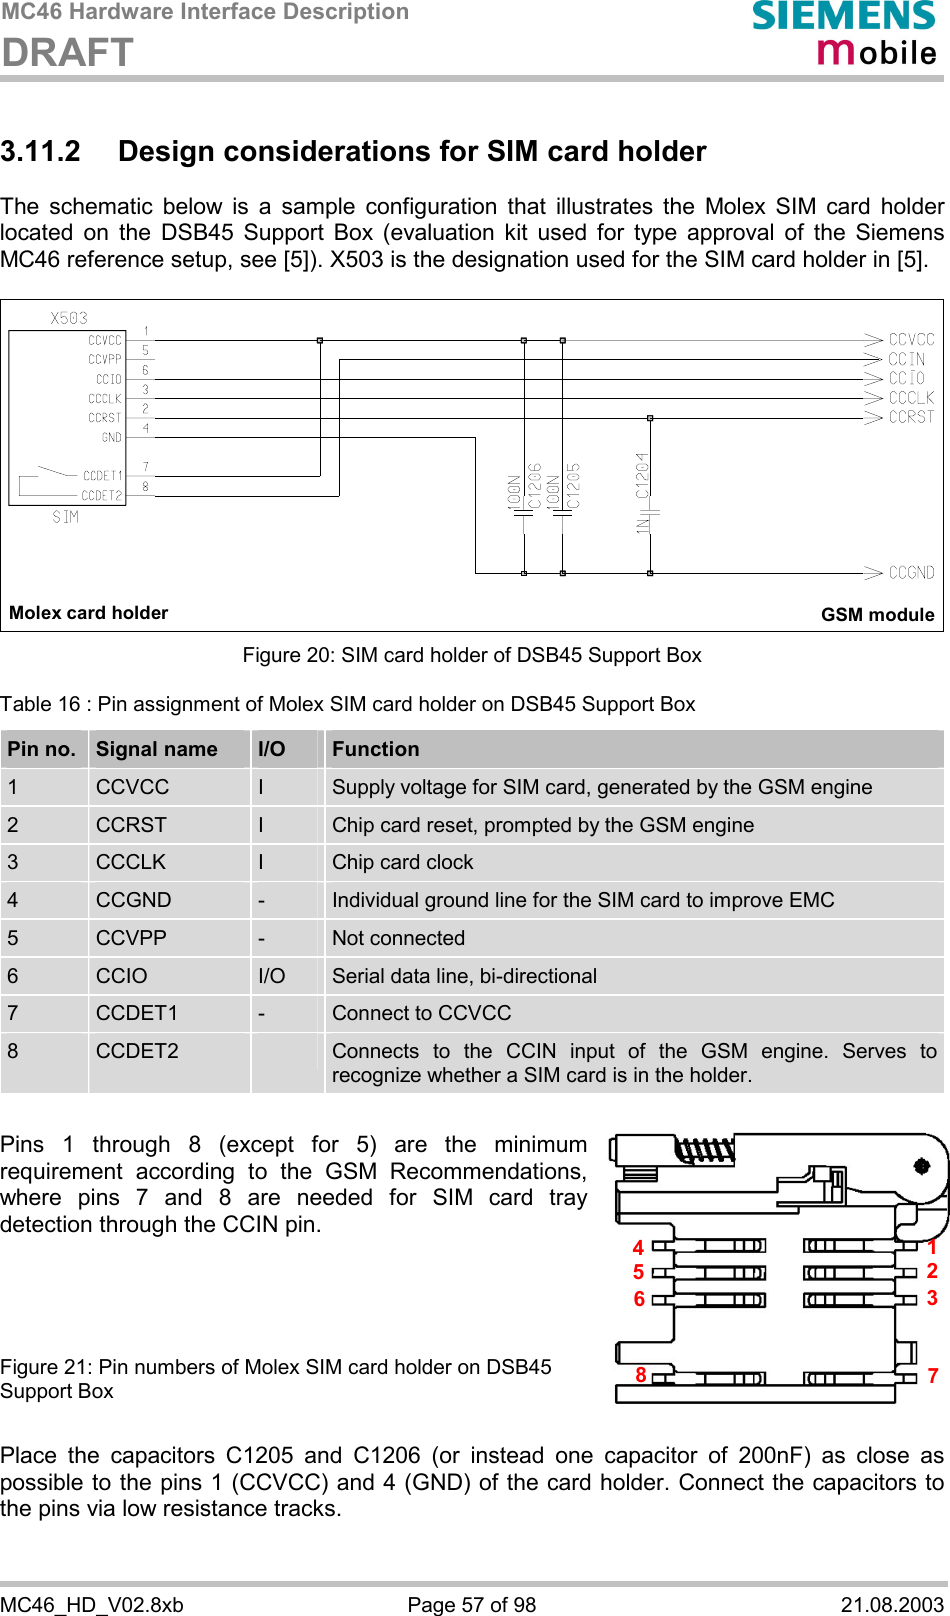 MC46 Hardware Interface Description DRAFT      MC46_HD_V02.8xb  Page 57 of 98  21.08.2003 3.11.2 Design considerations for SIM card holder The schematic below is a sample configuration that illustrates the Molex SIM card holder located on the DSB45 Support Box (evaluation kit used for type approval of the Siemens MC46 reference setup, see [5]). X503 is the designation used for the SIM card holder in [5].   Molex card holder GSM module  Figure 20: SIM card holder of DSB45 Support Box Table 16 : Pin assignment of Molex SIM card holder on DSB45 Support Box Pin no.  Signal name  I/O  Function 1  CCVCC  I  Supply voltage for SIM card, generated by the GSM engine 2  CCRST  I  Chip card reset, prompted by the GSM engine 3  CCCLK  I  Chip card clock 4  CCGND  -  Individual ground line for the SIM card to improve EMC 5  CCVPP  -  Not connected 6  CCIO  I/O  Serial data line, bi-directional 7  CCDET1  -  Connect to CCVCC  8  CCDET2   Connects to the CCIN input of the GSM engine. Serves to recognize whether a SIM card is in the holder.    Pins 1 through 8 (except for 5) are the minimum requirement according to the GSM Recommendations, where pins 7 and 8 are needed for SIM card tray detection through the CCIN pin.      Figure 21: Pin numbers of Molex SIM card holder on DSB45 Support Box  Place the capacitors C1205 and C1206 (or instead one capacitor of 200nF) as close as possible to the pins 1 (CCVCC) and 4 (GND) of the card holder. Connect the capacitors to the pins via low resistance tracks.  45127836